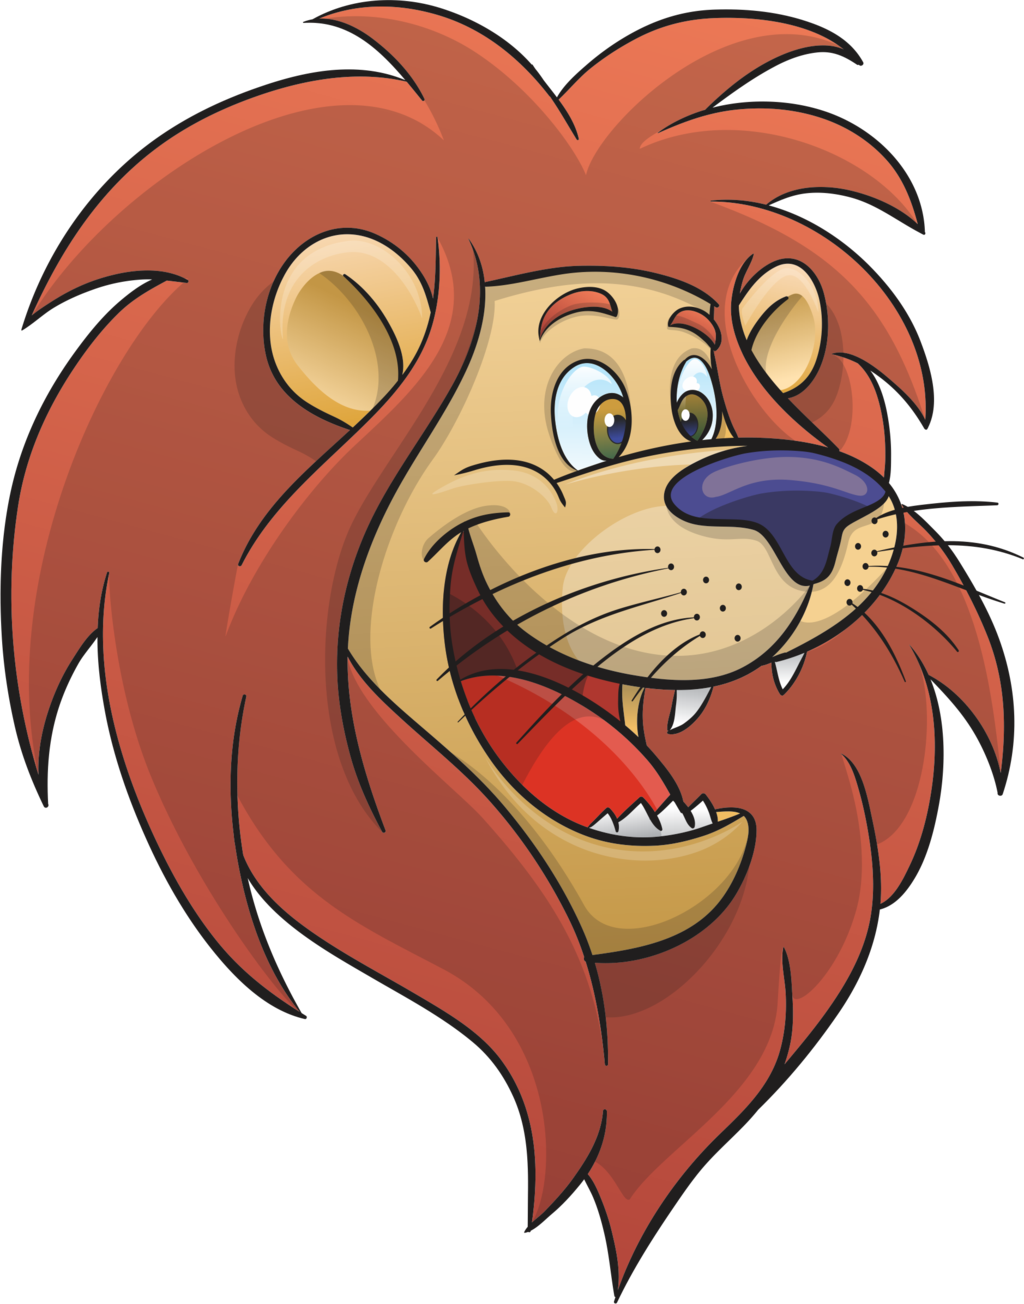 Lions Cartoon Images - Clipart library